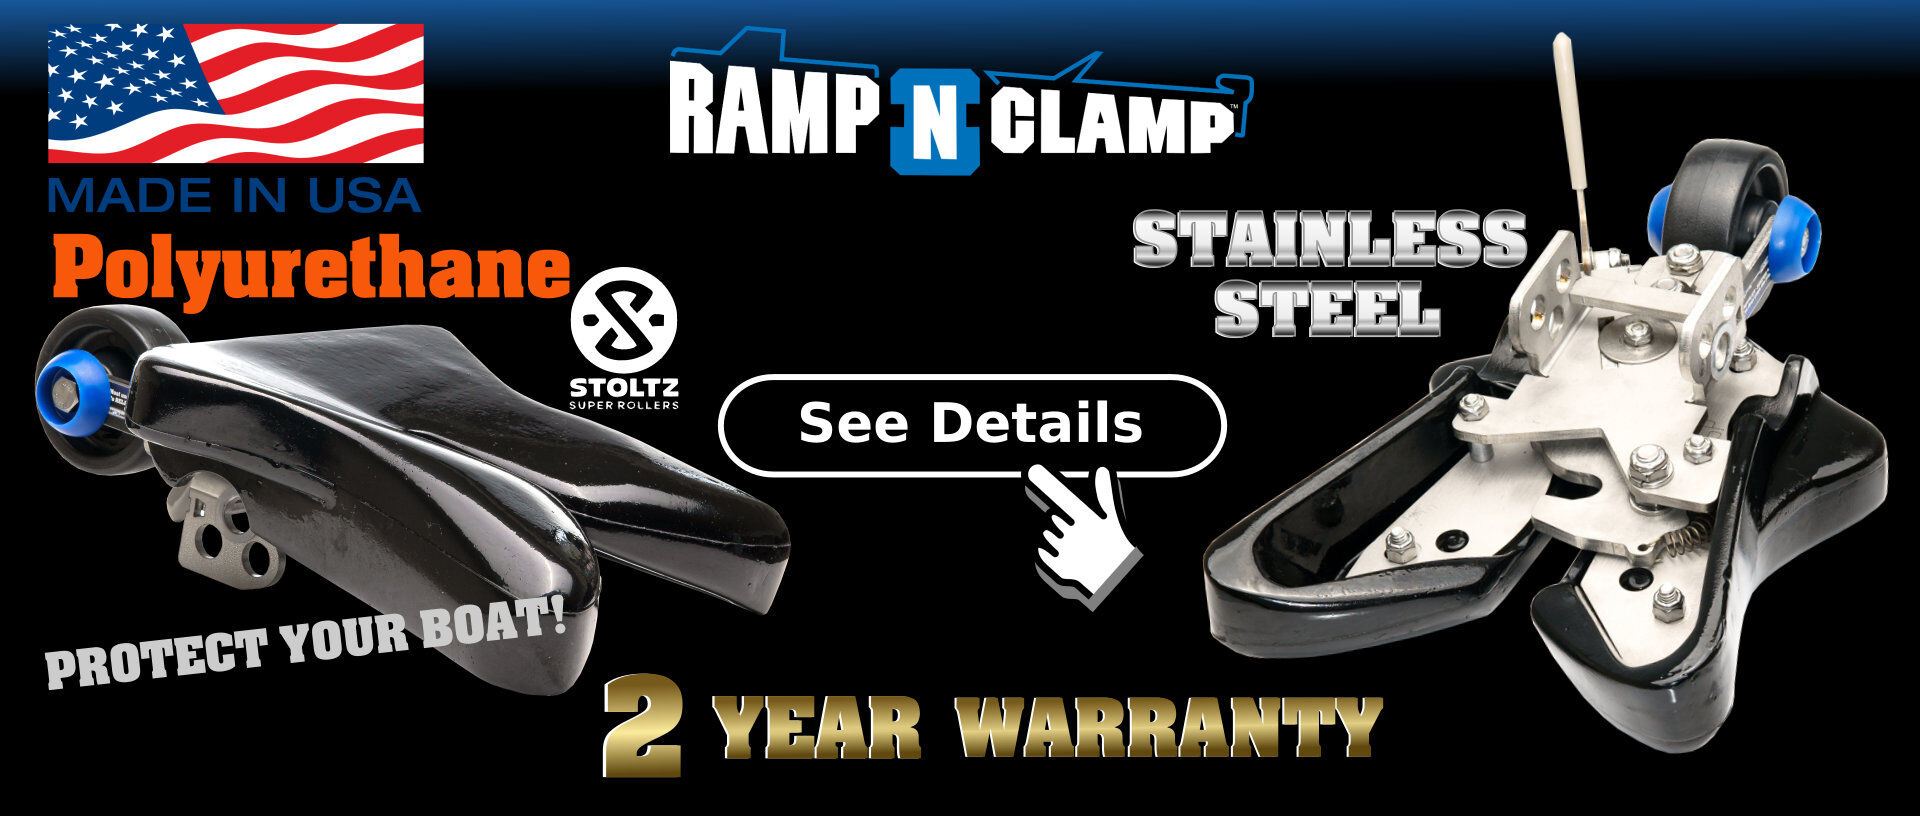 Ramp N Clamp Specifications